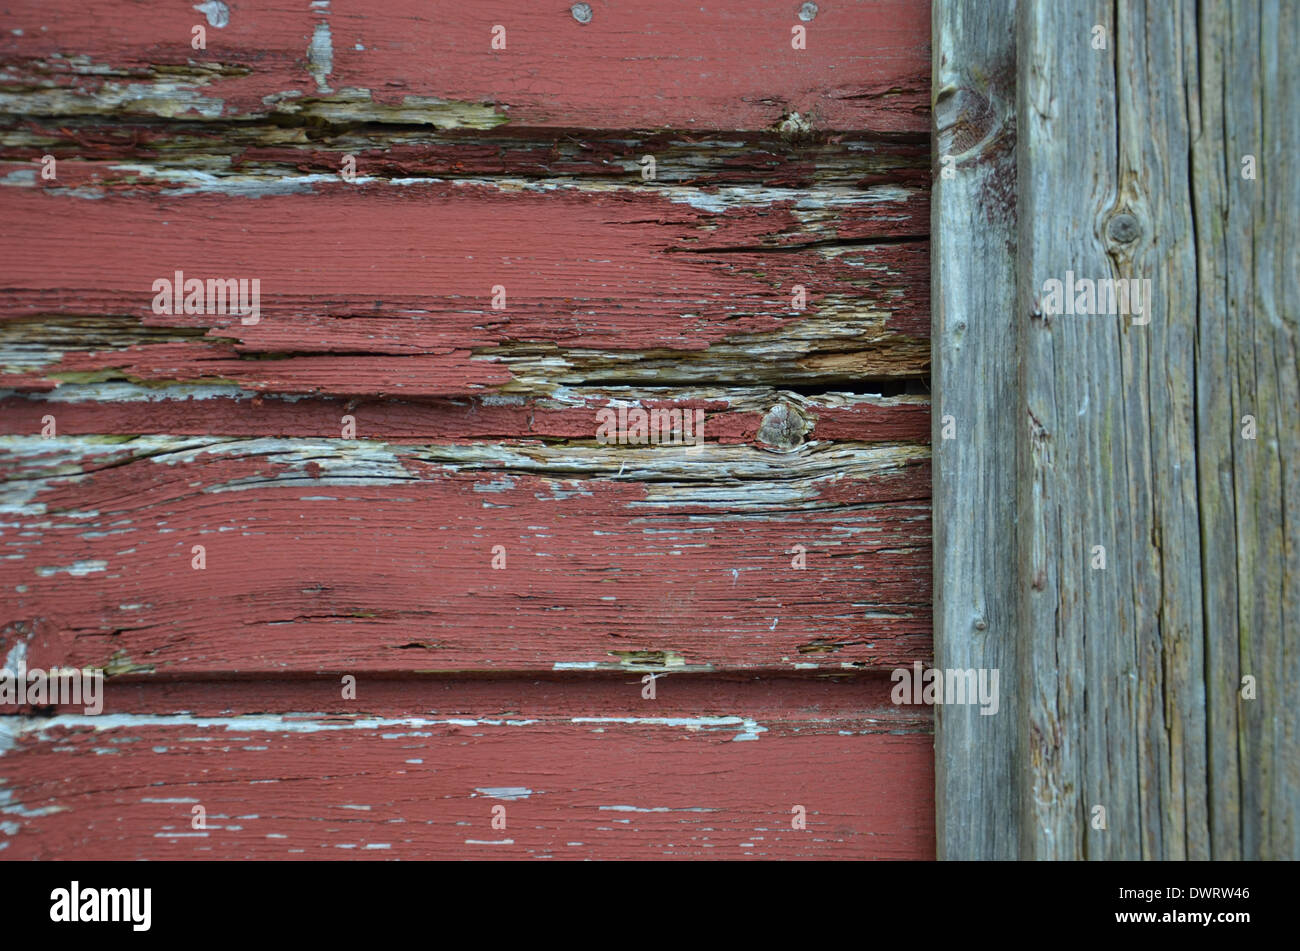 An old wooden surface. Stock Photo